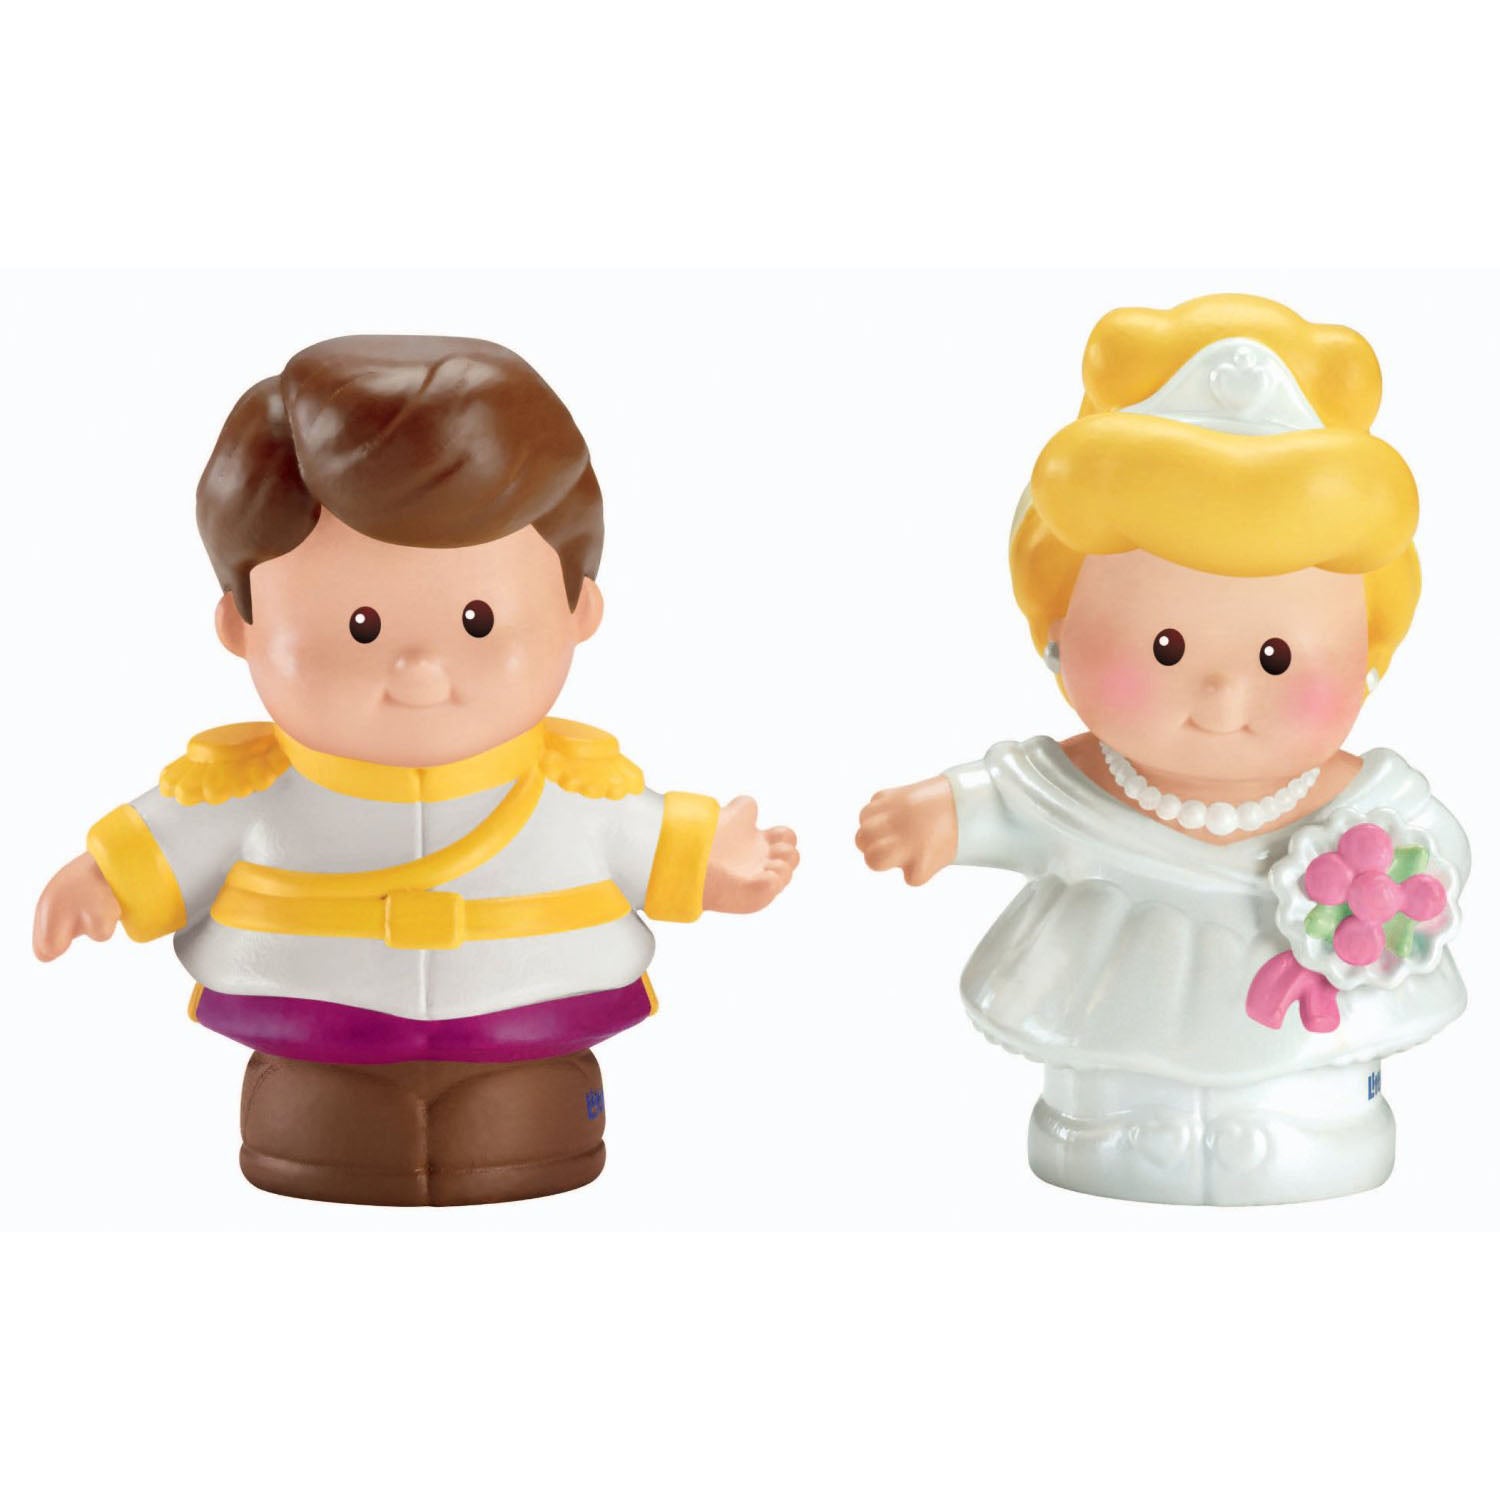 Disney Princess Toys - Cinderella and Prince Charming Little People 2-Pack